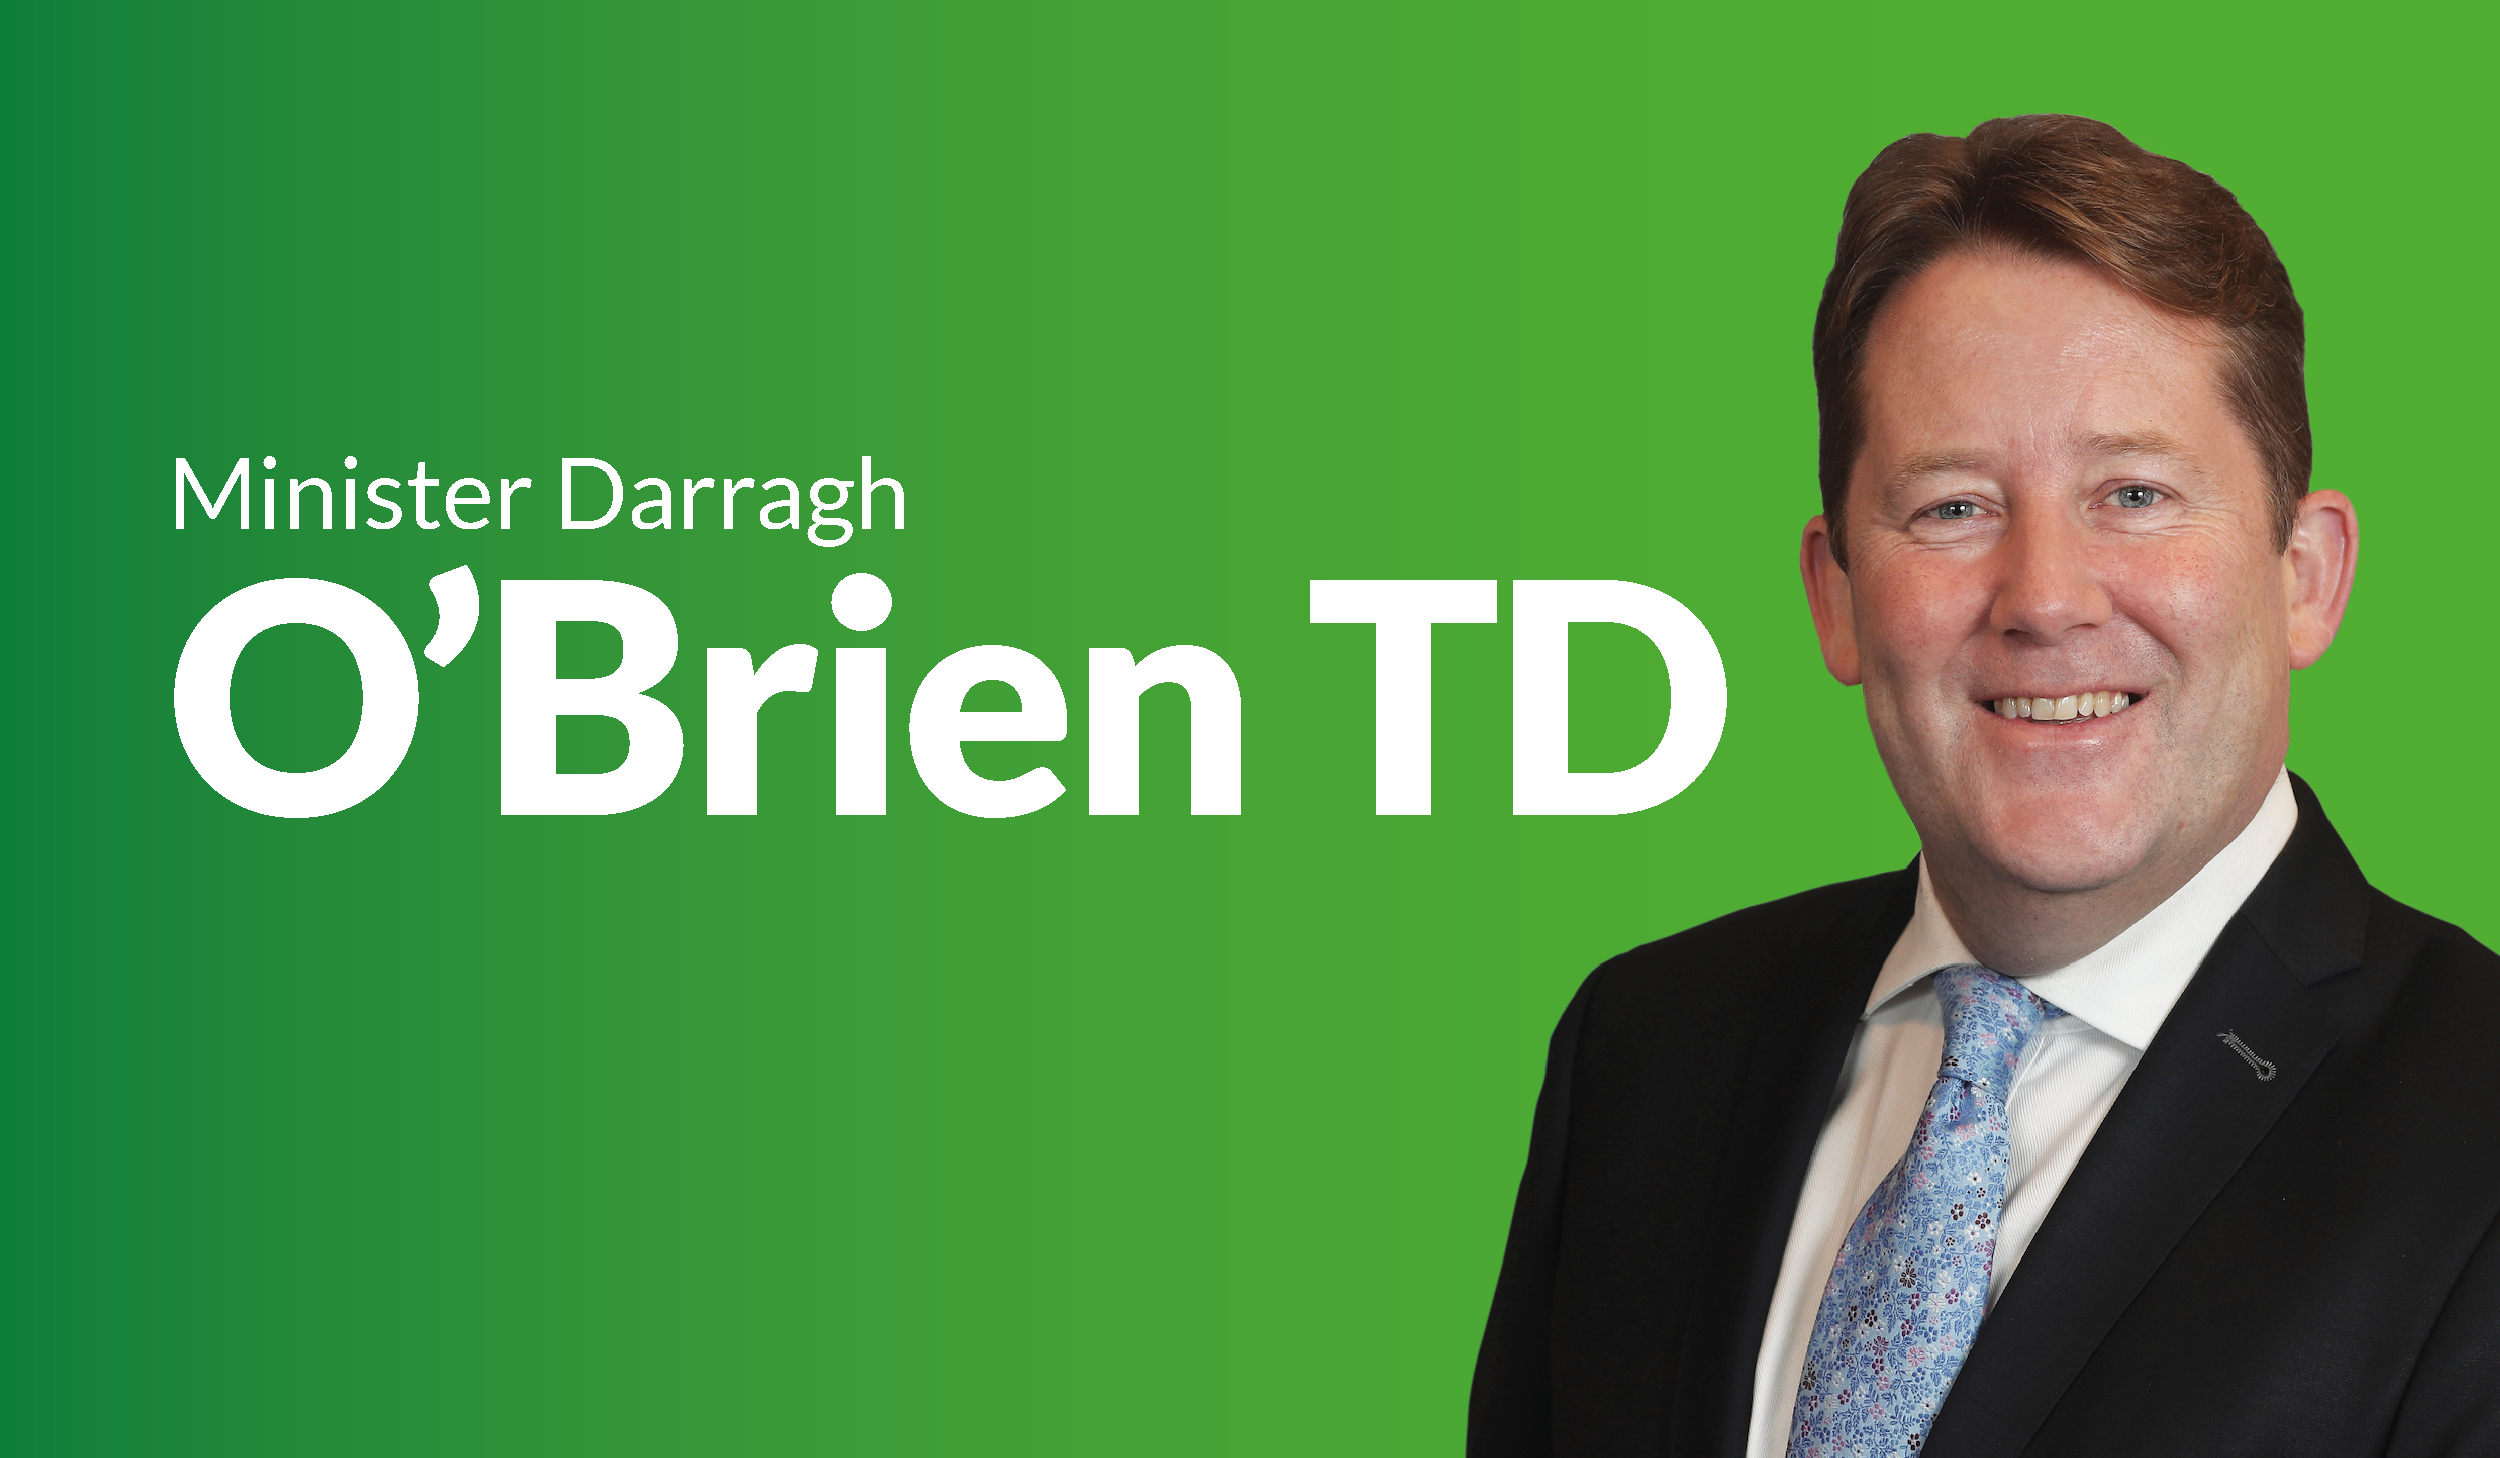 Speech by Darragh O'Brien TD, Minister for Housing, Local Government and Heritage at the 82ú Ard Fheis